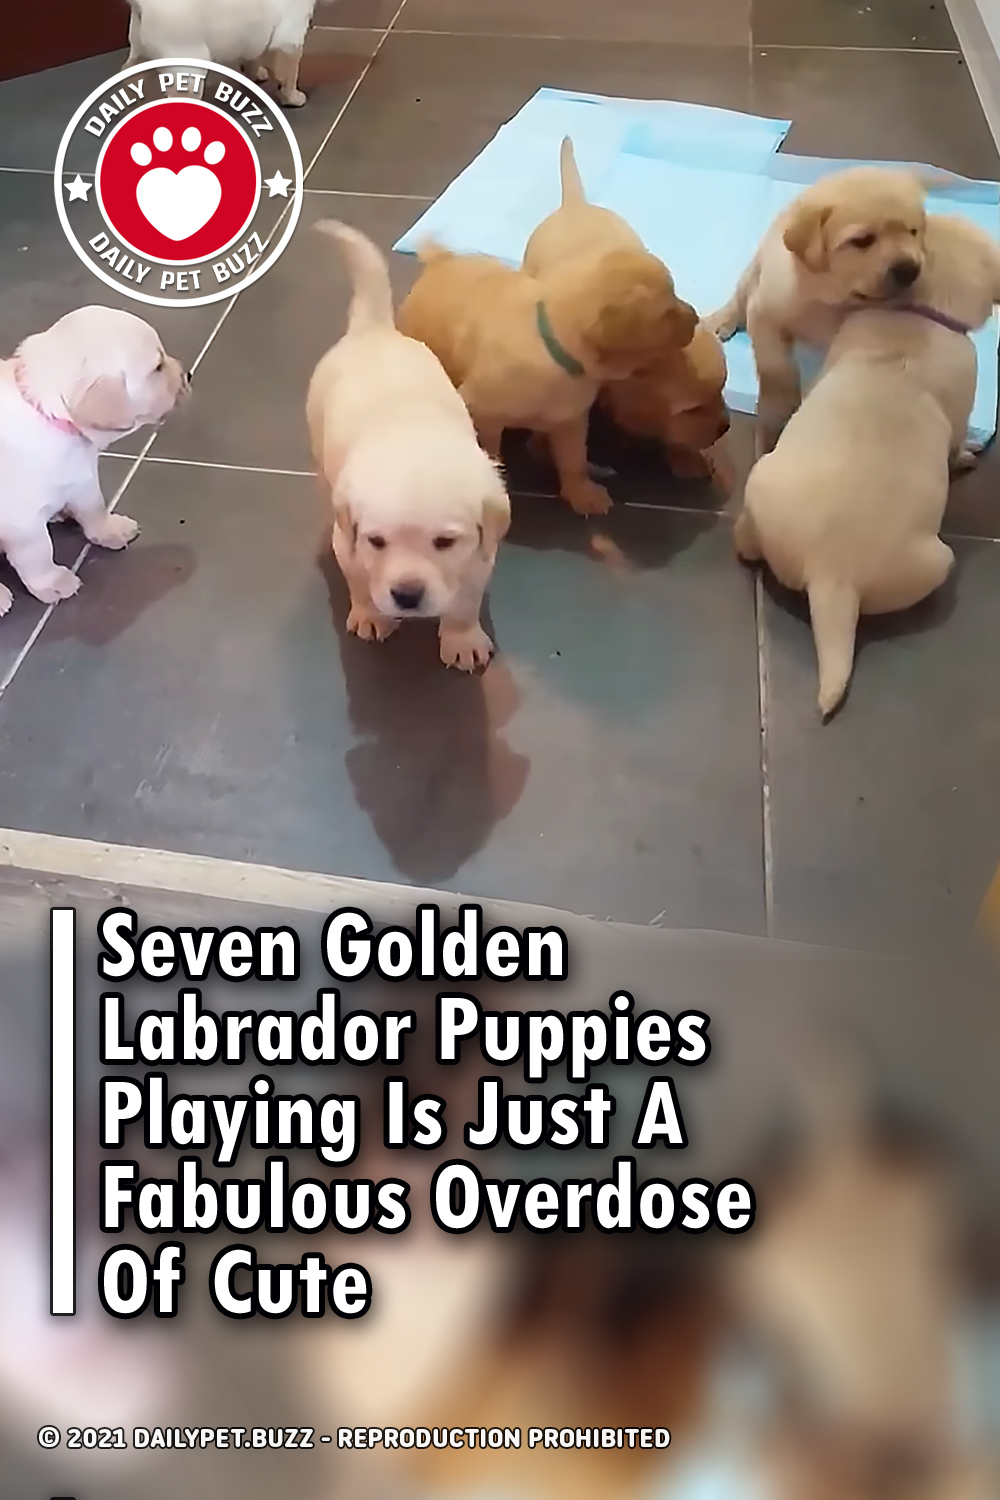 Seven Golden Labrador Puppies Playing Is Just A Fabulous Overdose Of Cute